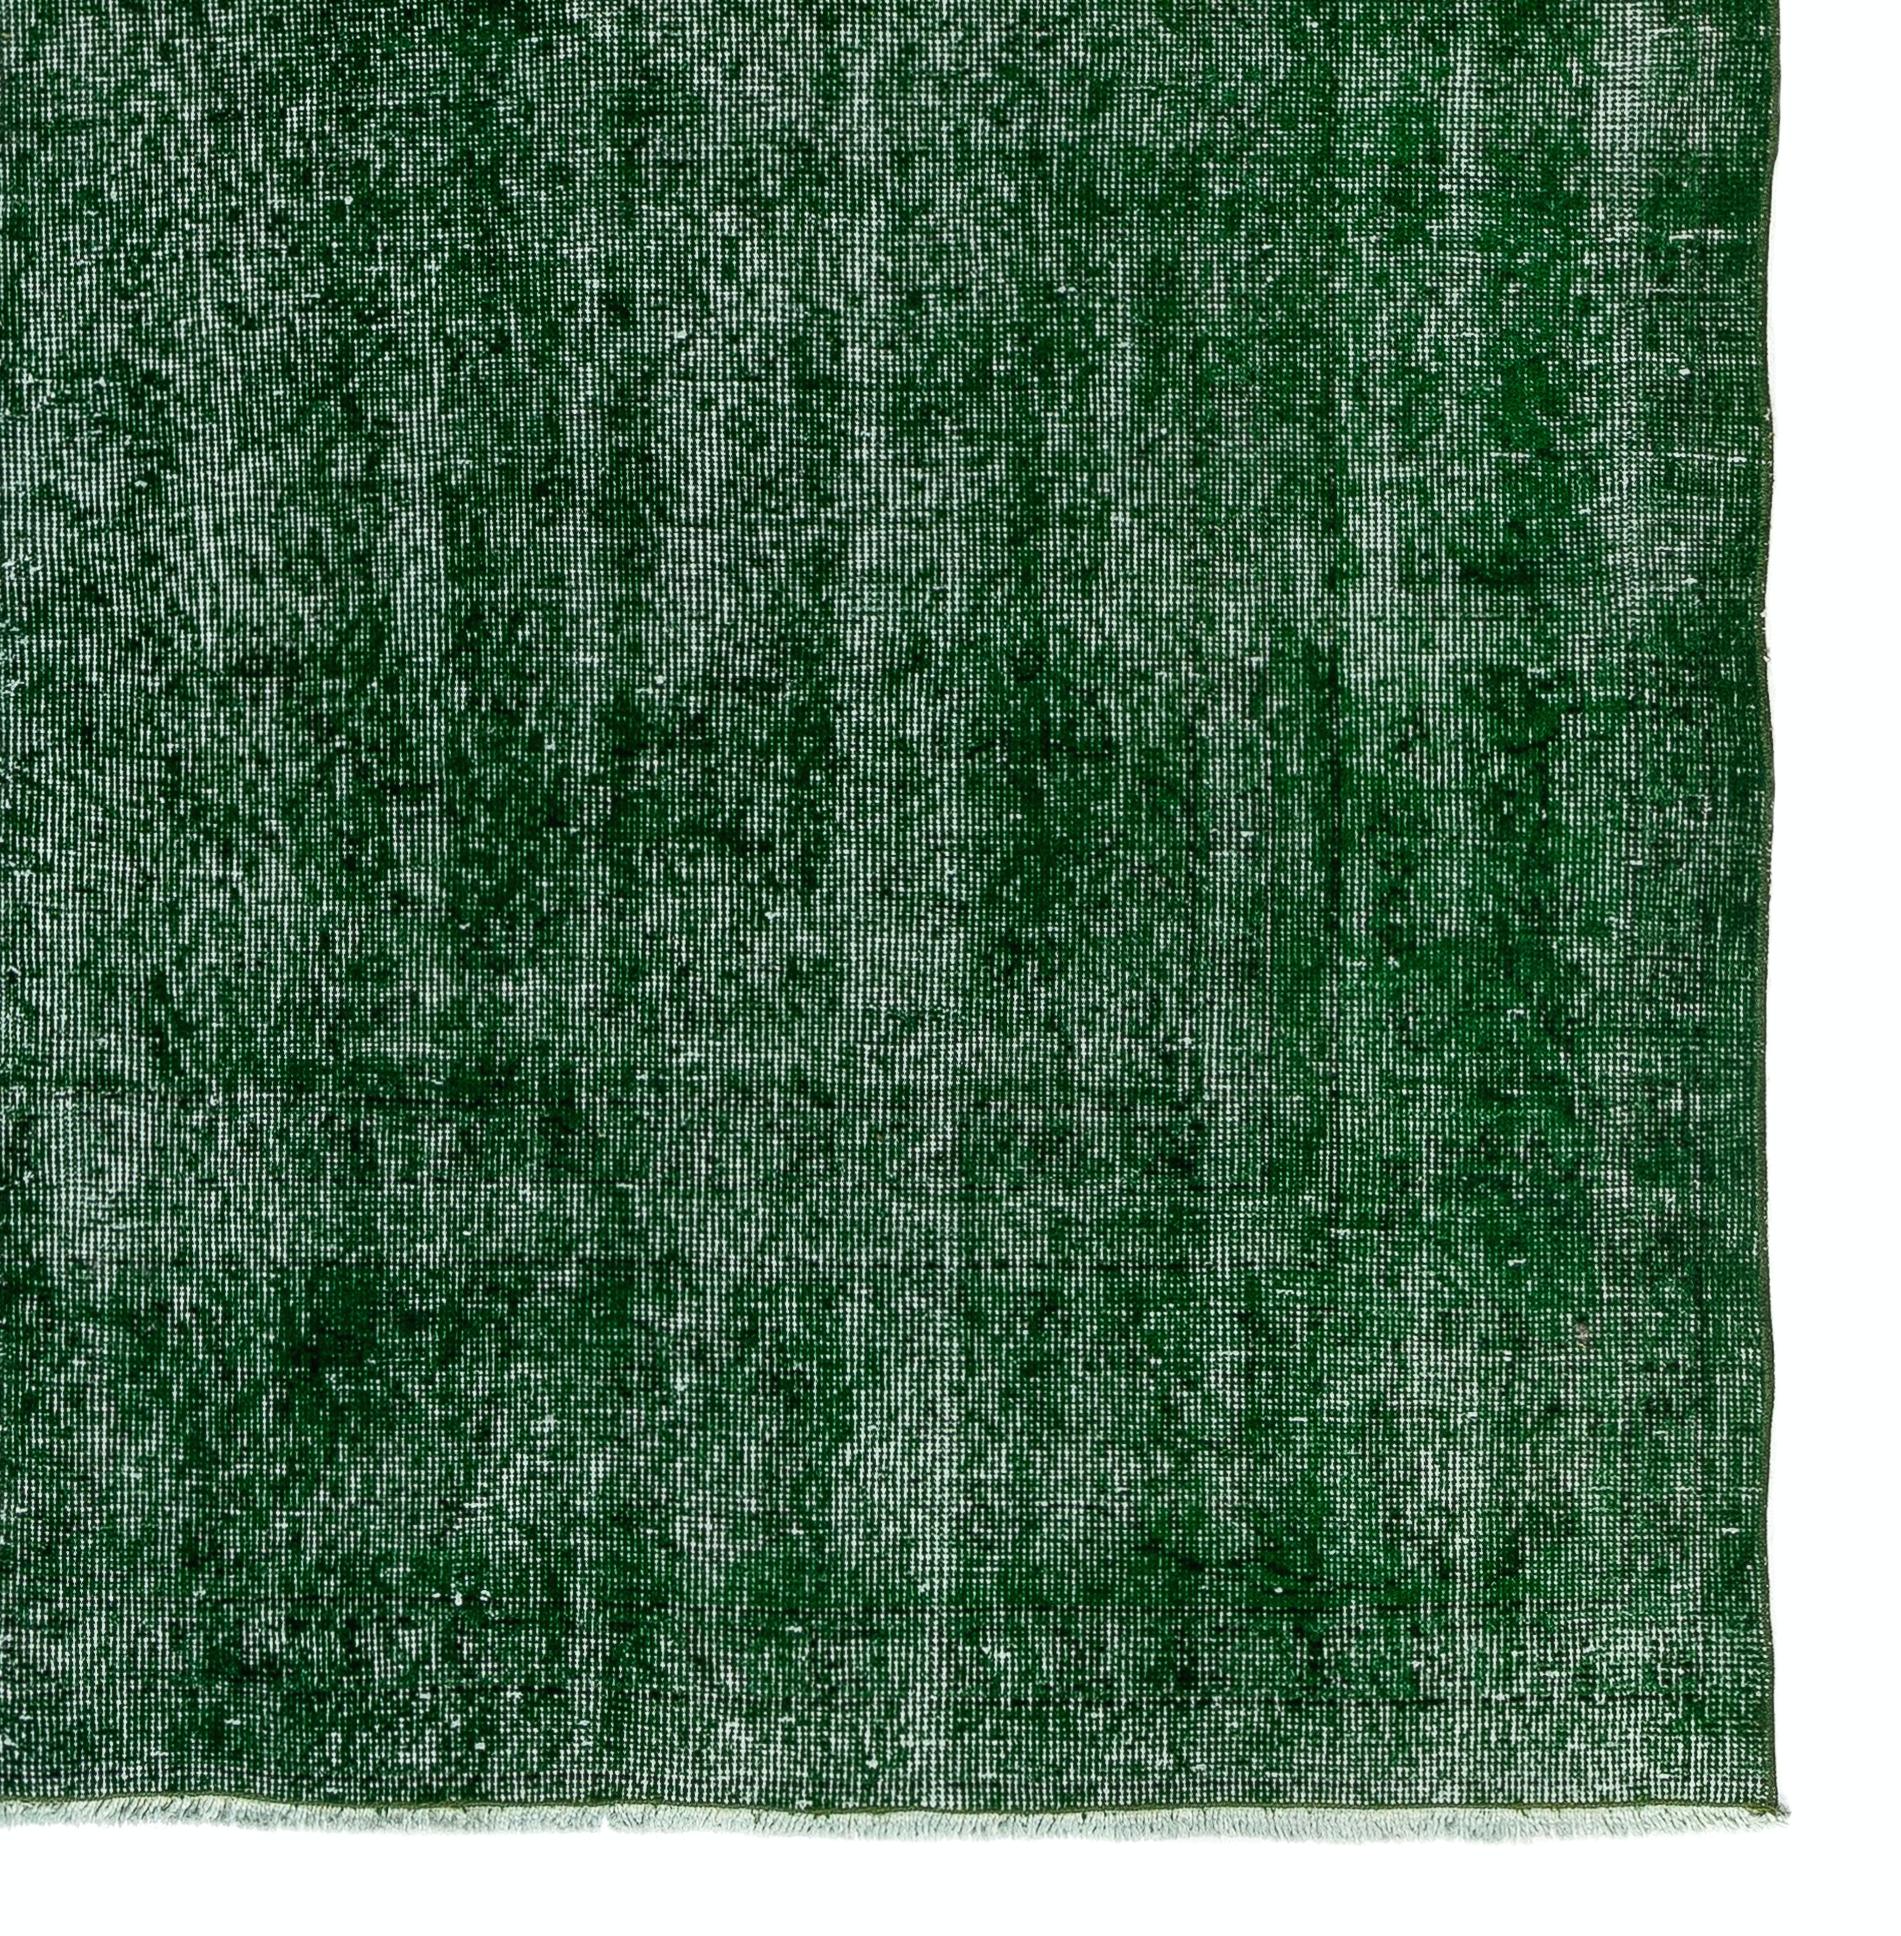 Hand-Woven 7x10 Ft Distressed Vintage Handmade Rug Over-Dyed in Green for Modern Interiors